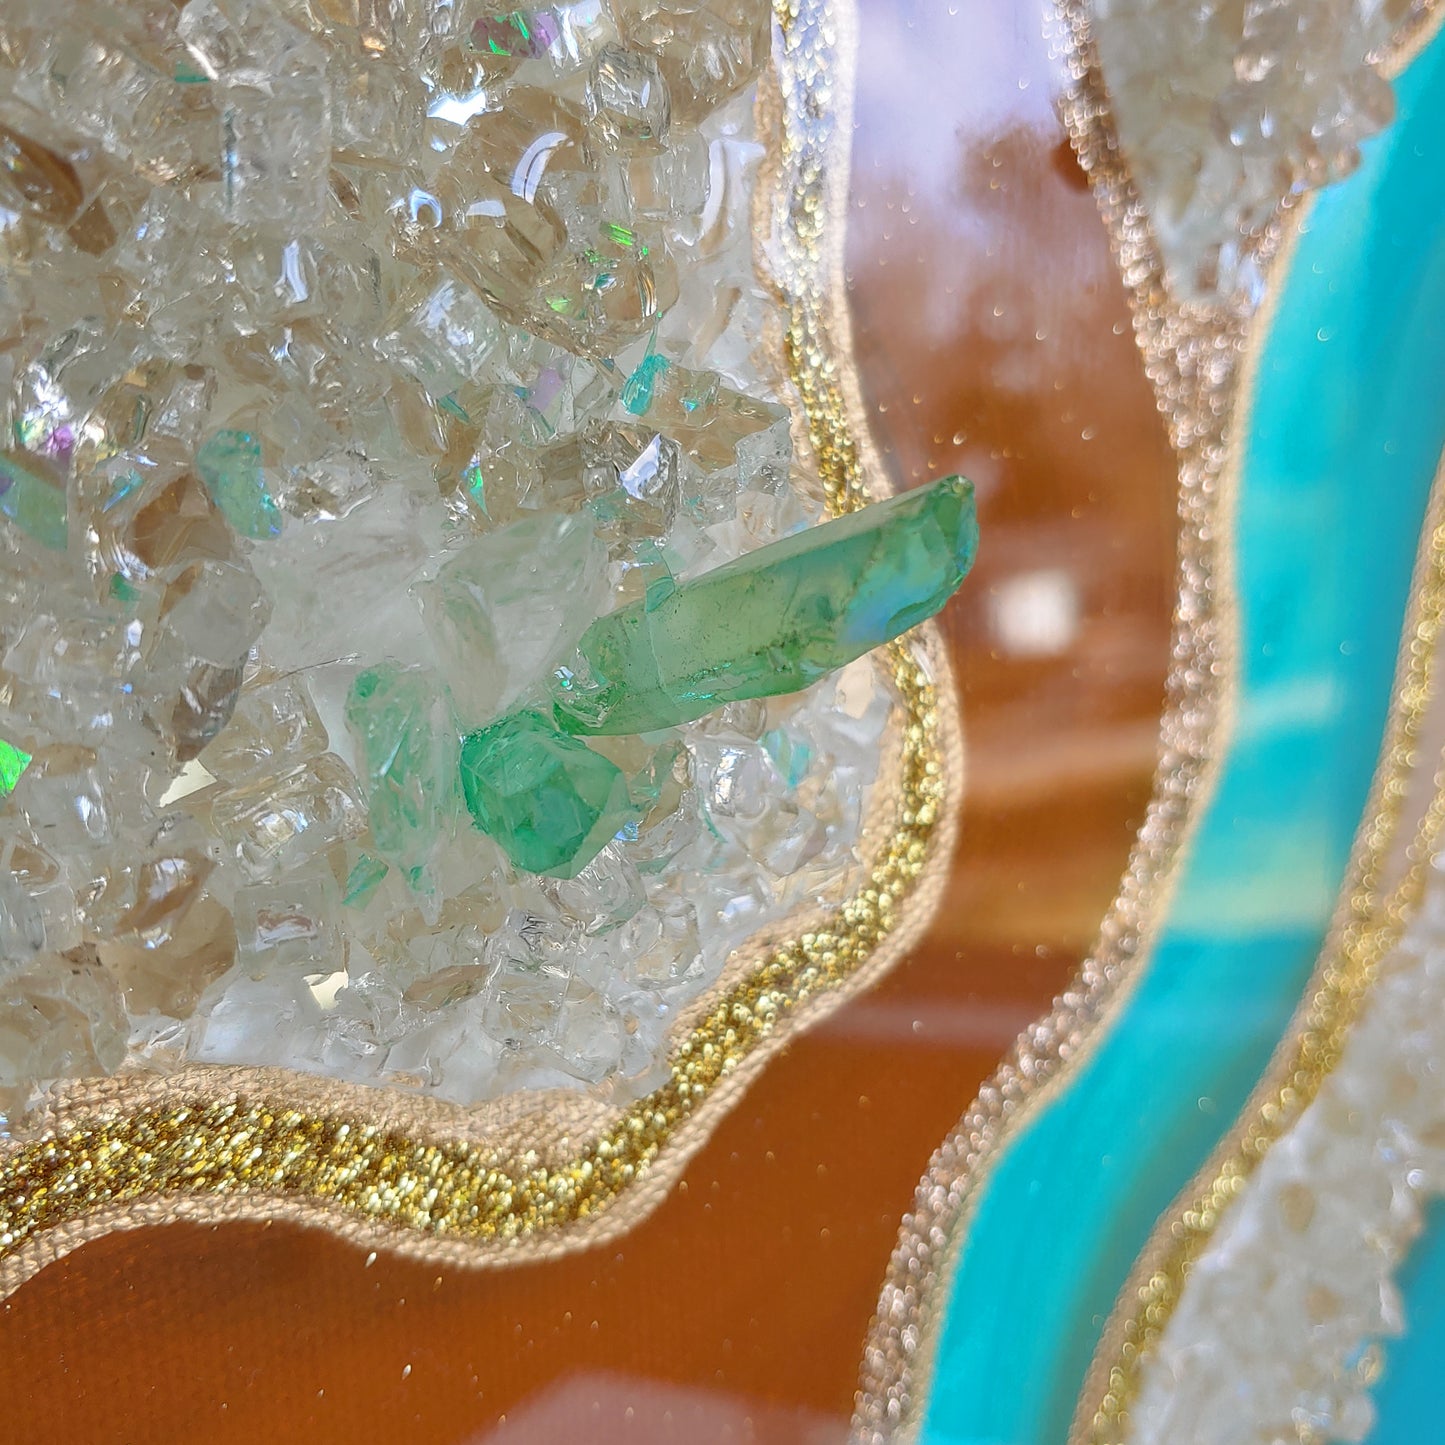 Turquoise and caramel geode artwork with glass and crystals